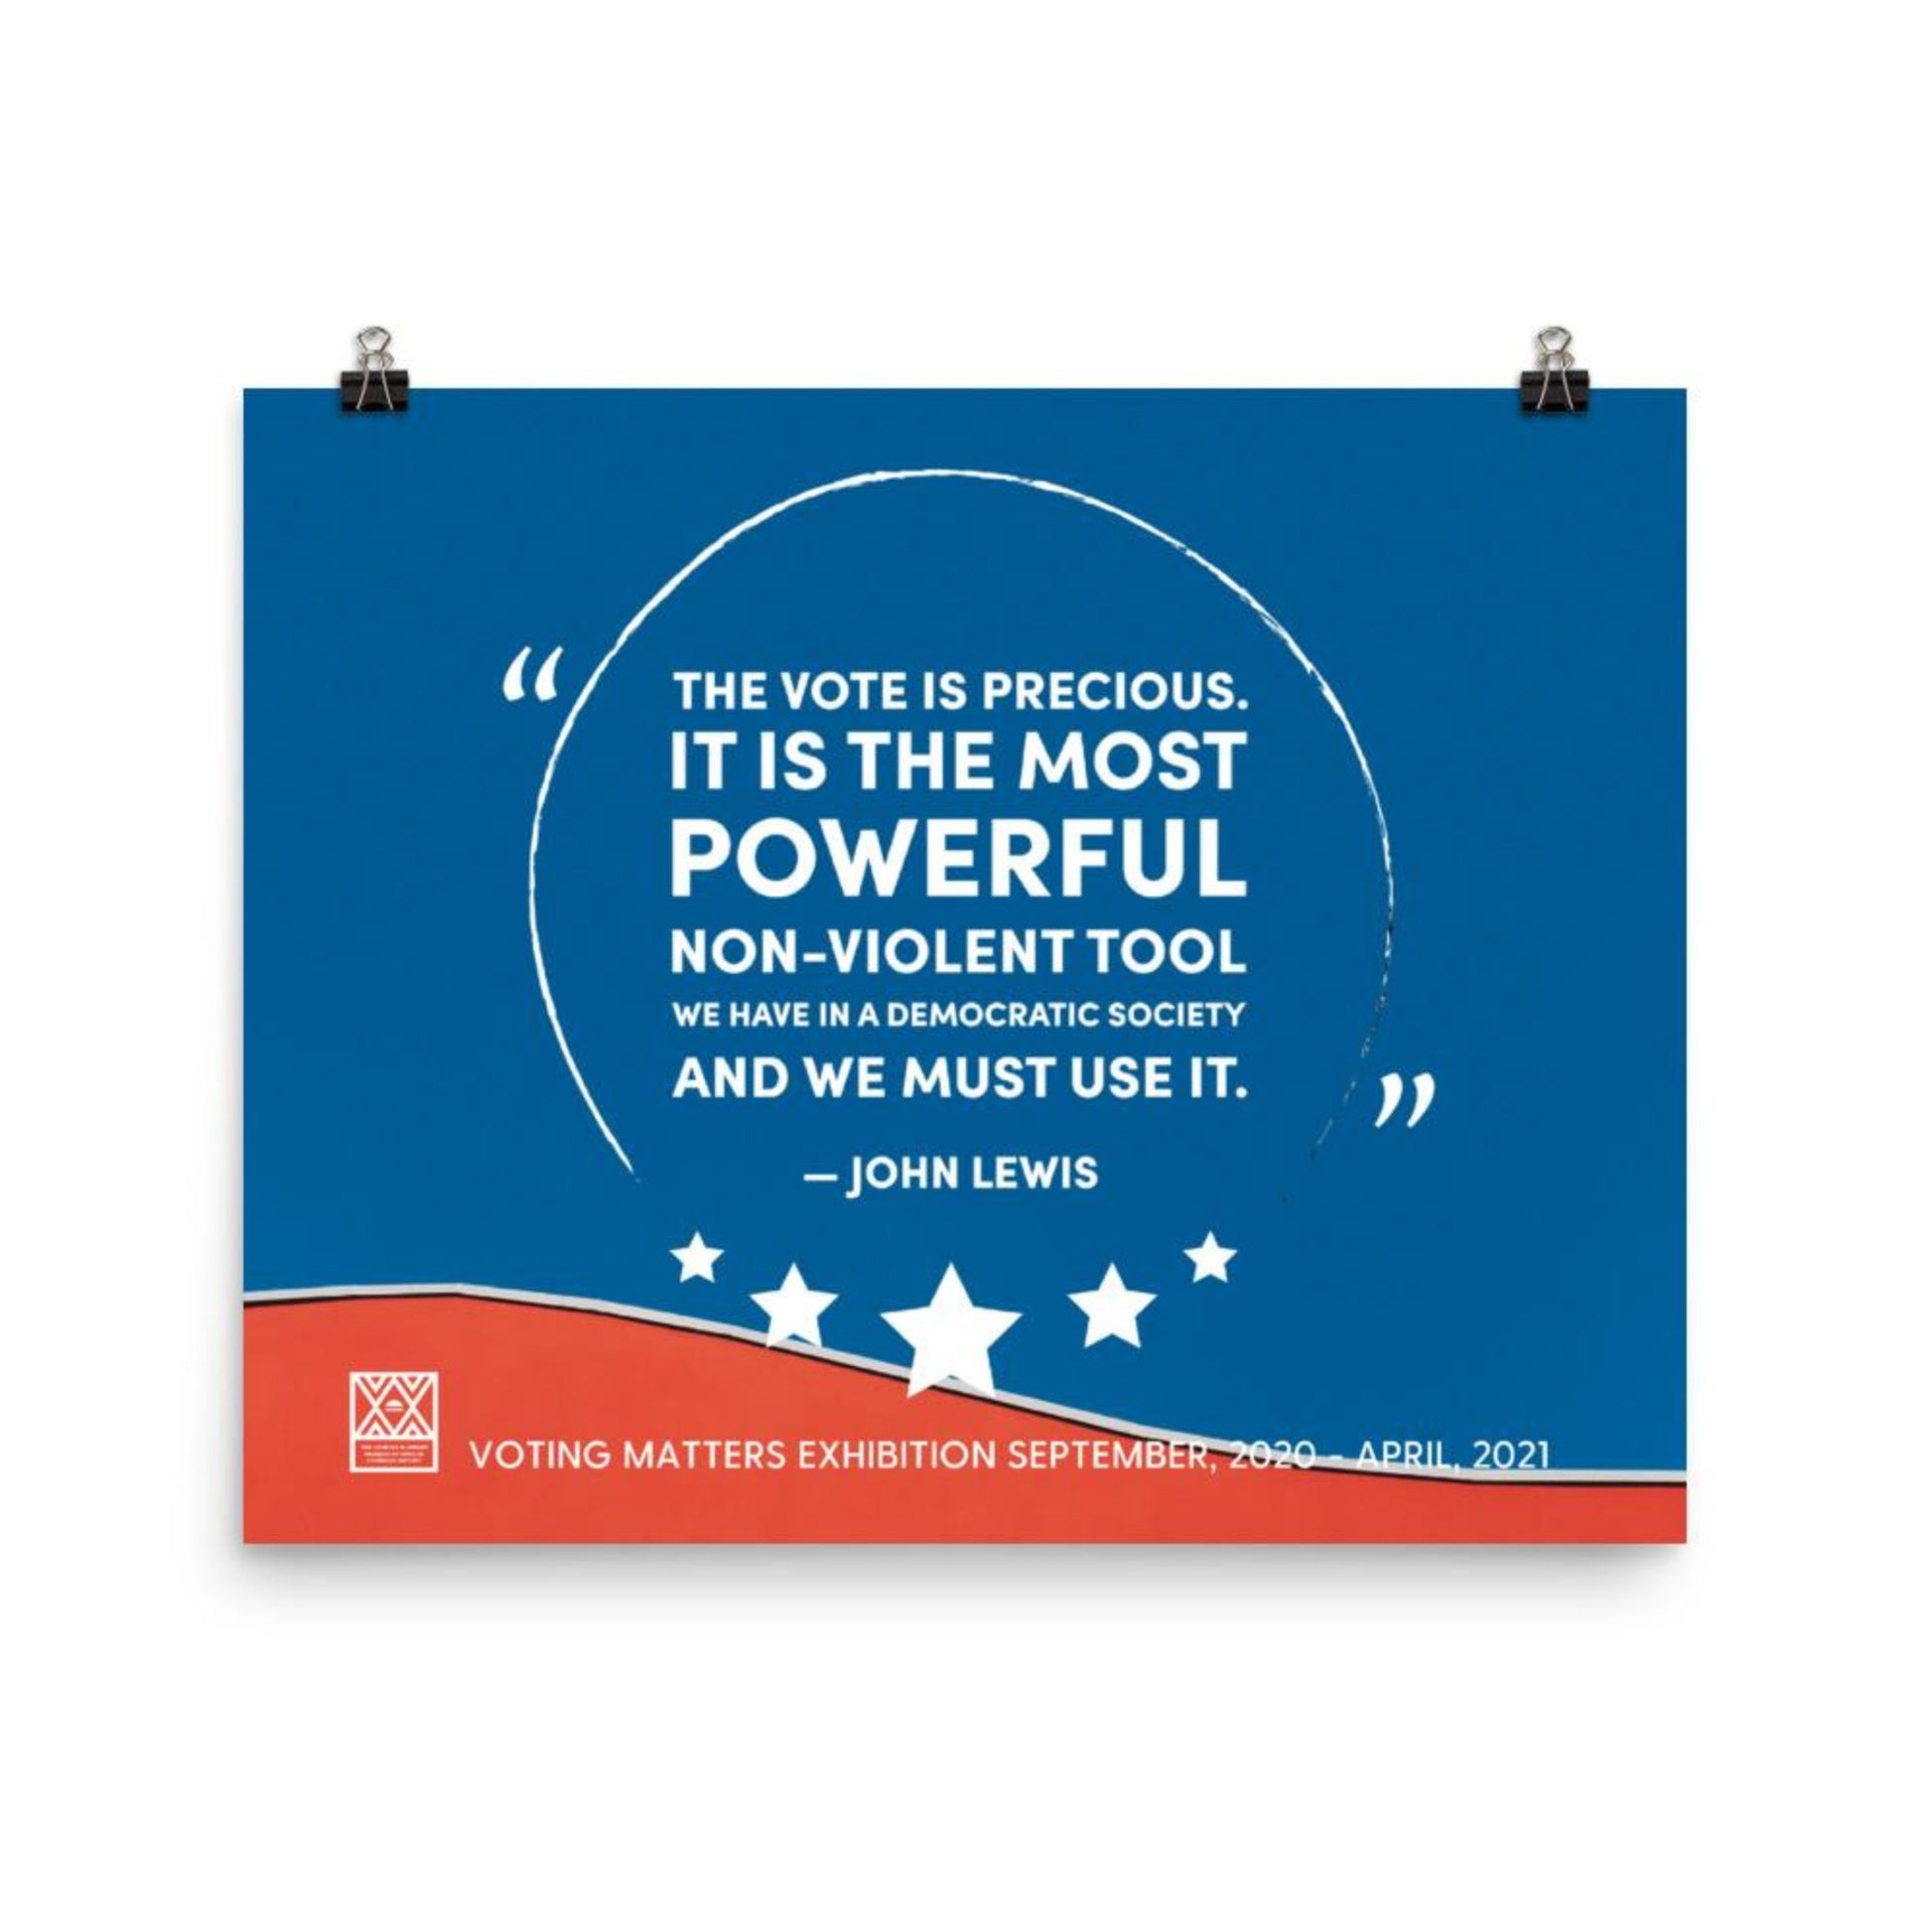 12 in by 18 inch poster with a quote by John Lewis, The vote is the most powerful non-violent tool we have in a democratic society and we must use it